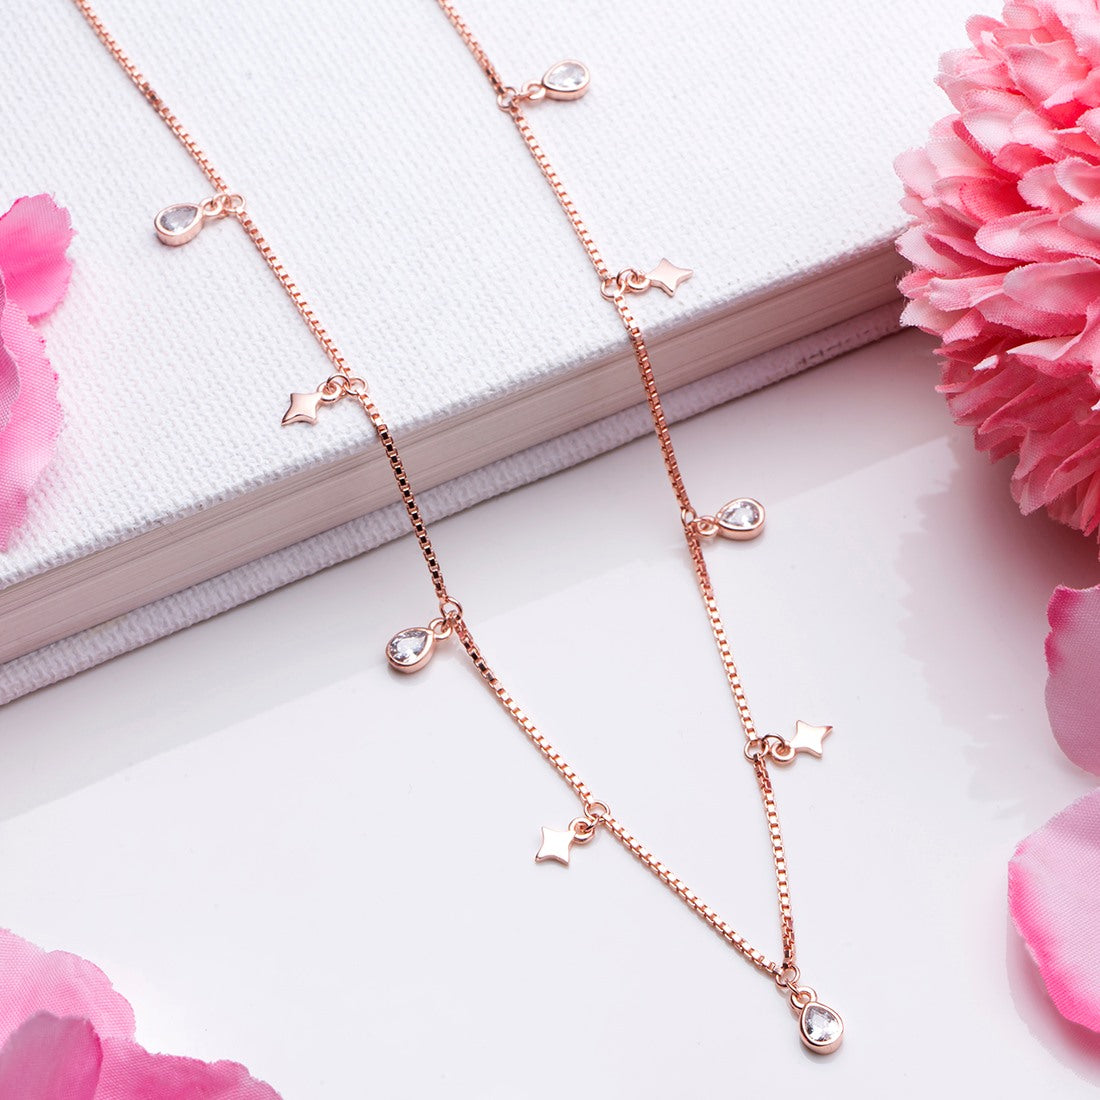 Starry Serenade Rose Gold-Plated 925 Sterling Silver Necklace